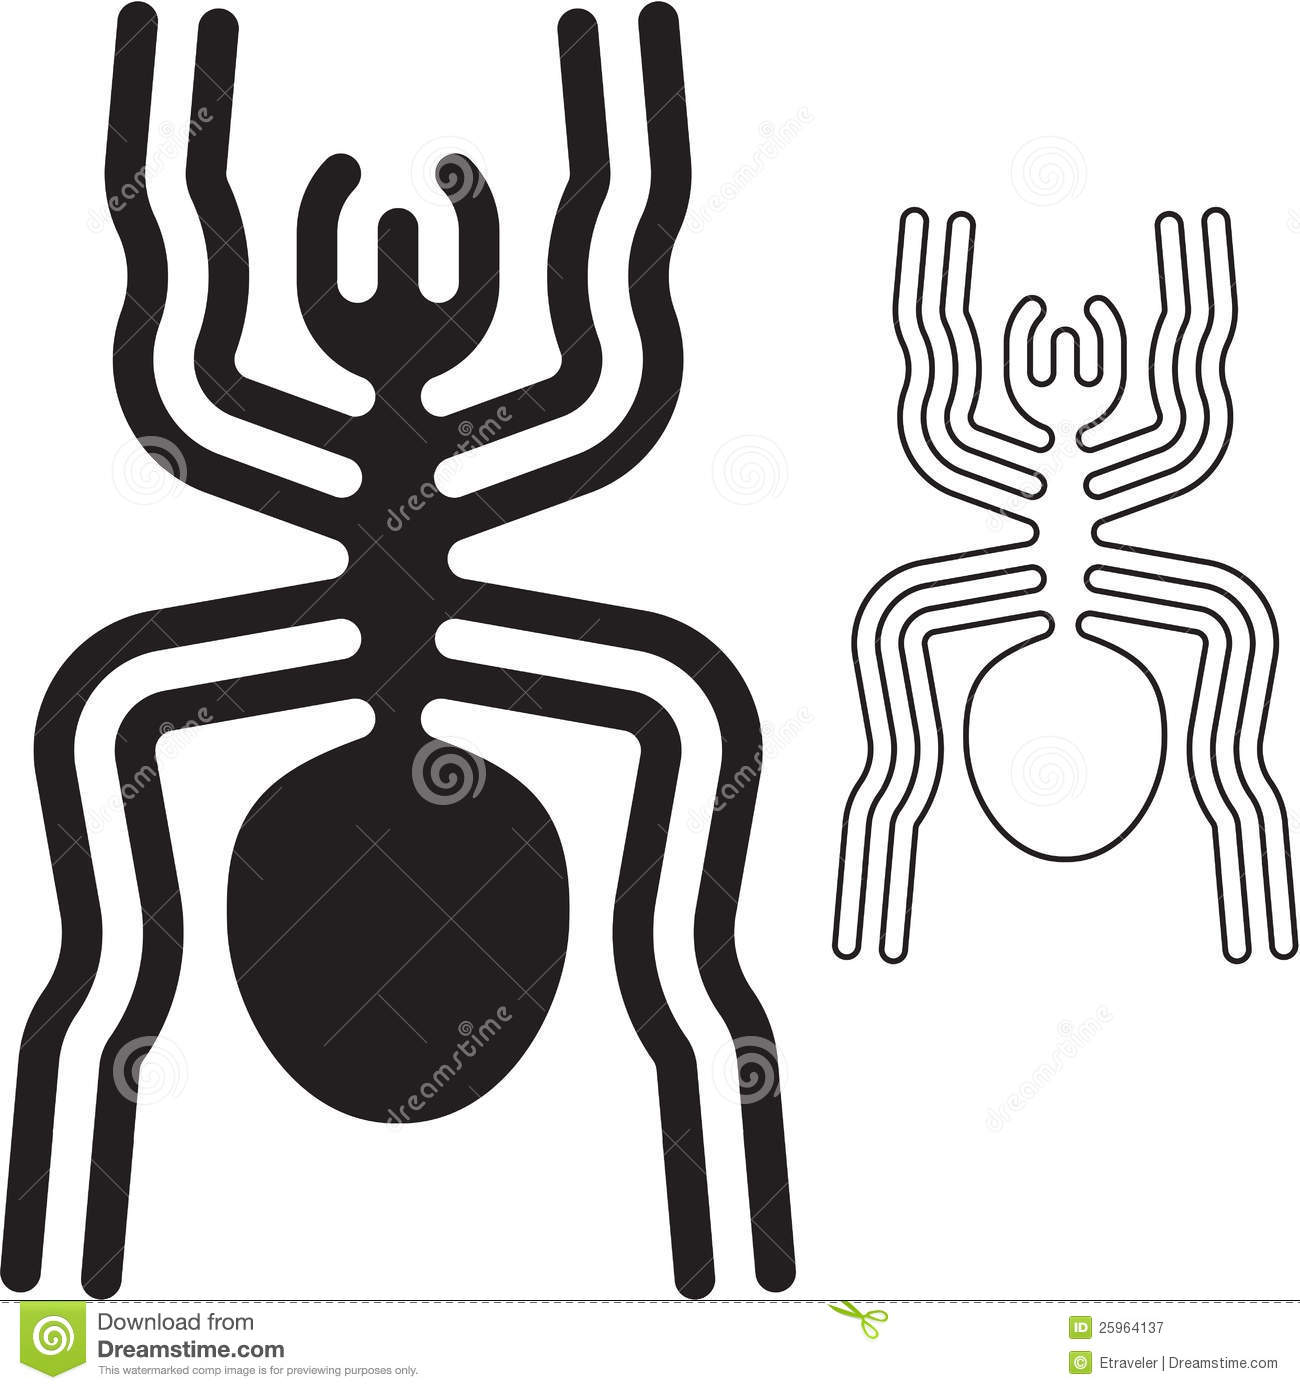 Nazca Lines Spider Royalty Free Stock Photography.